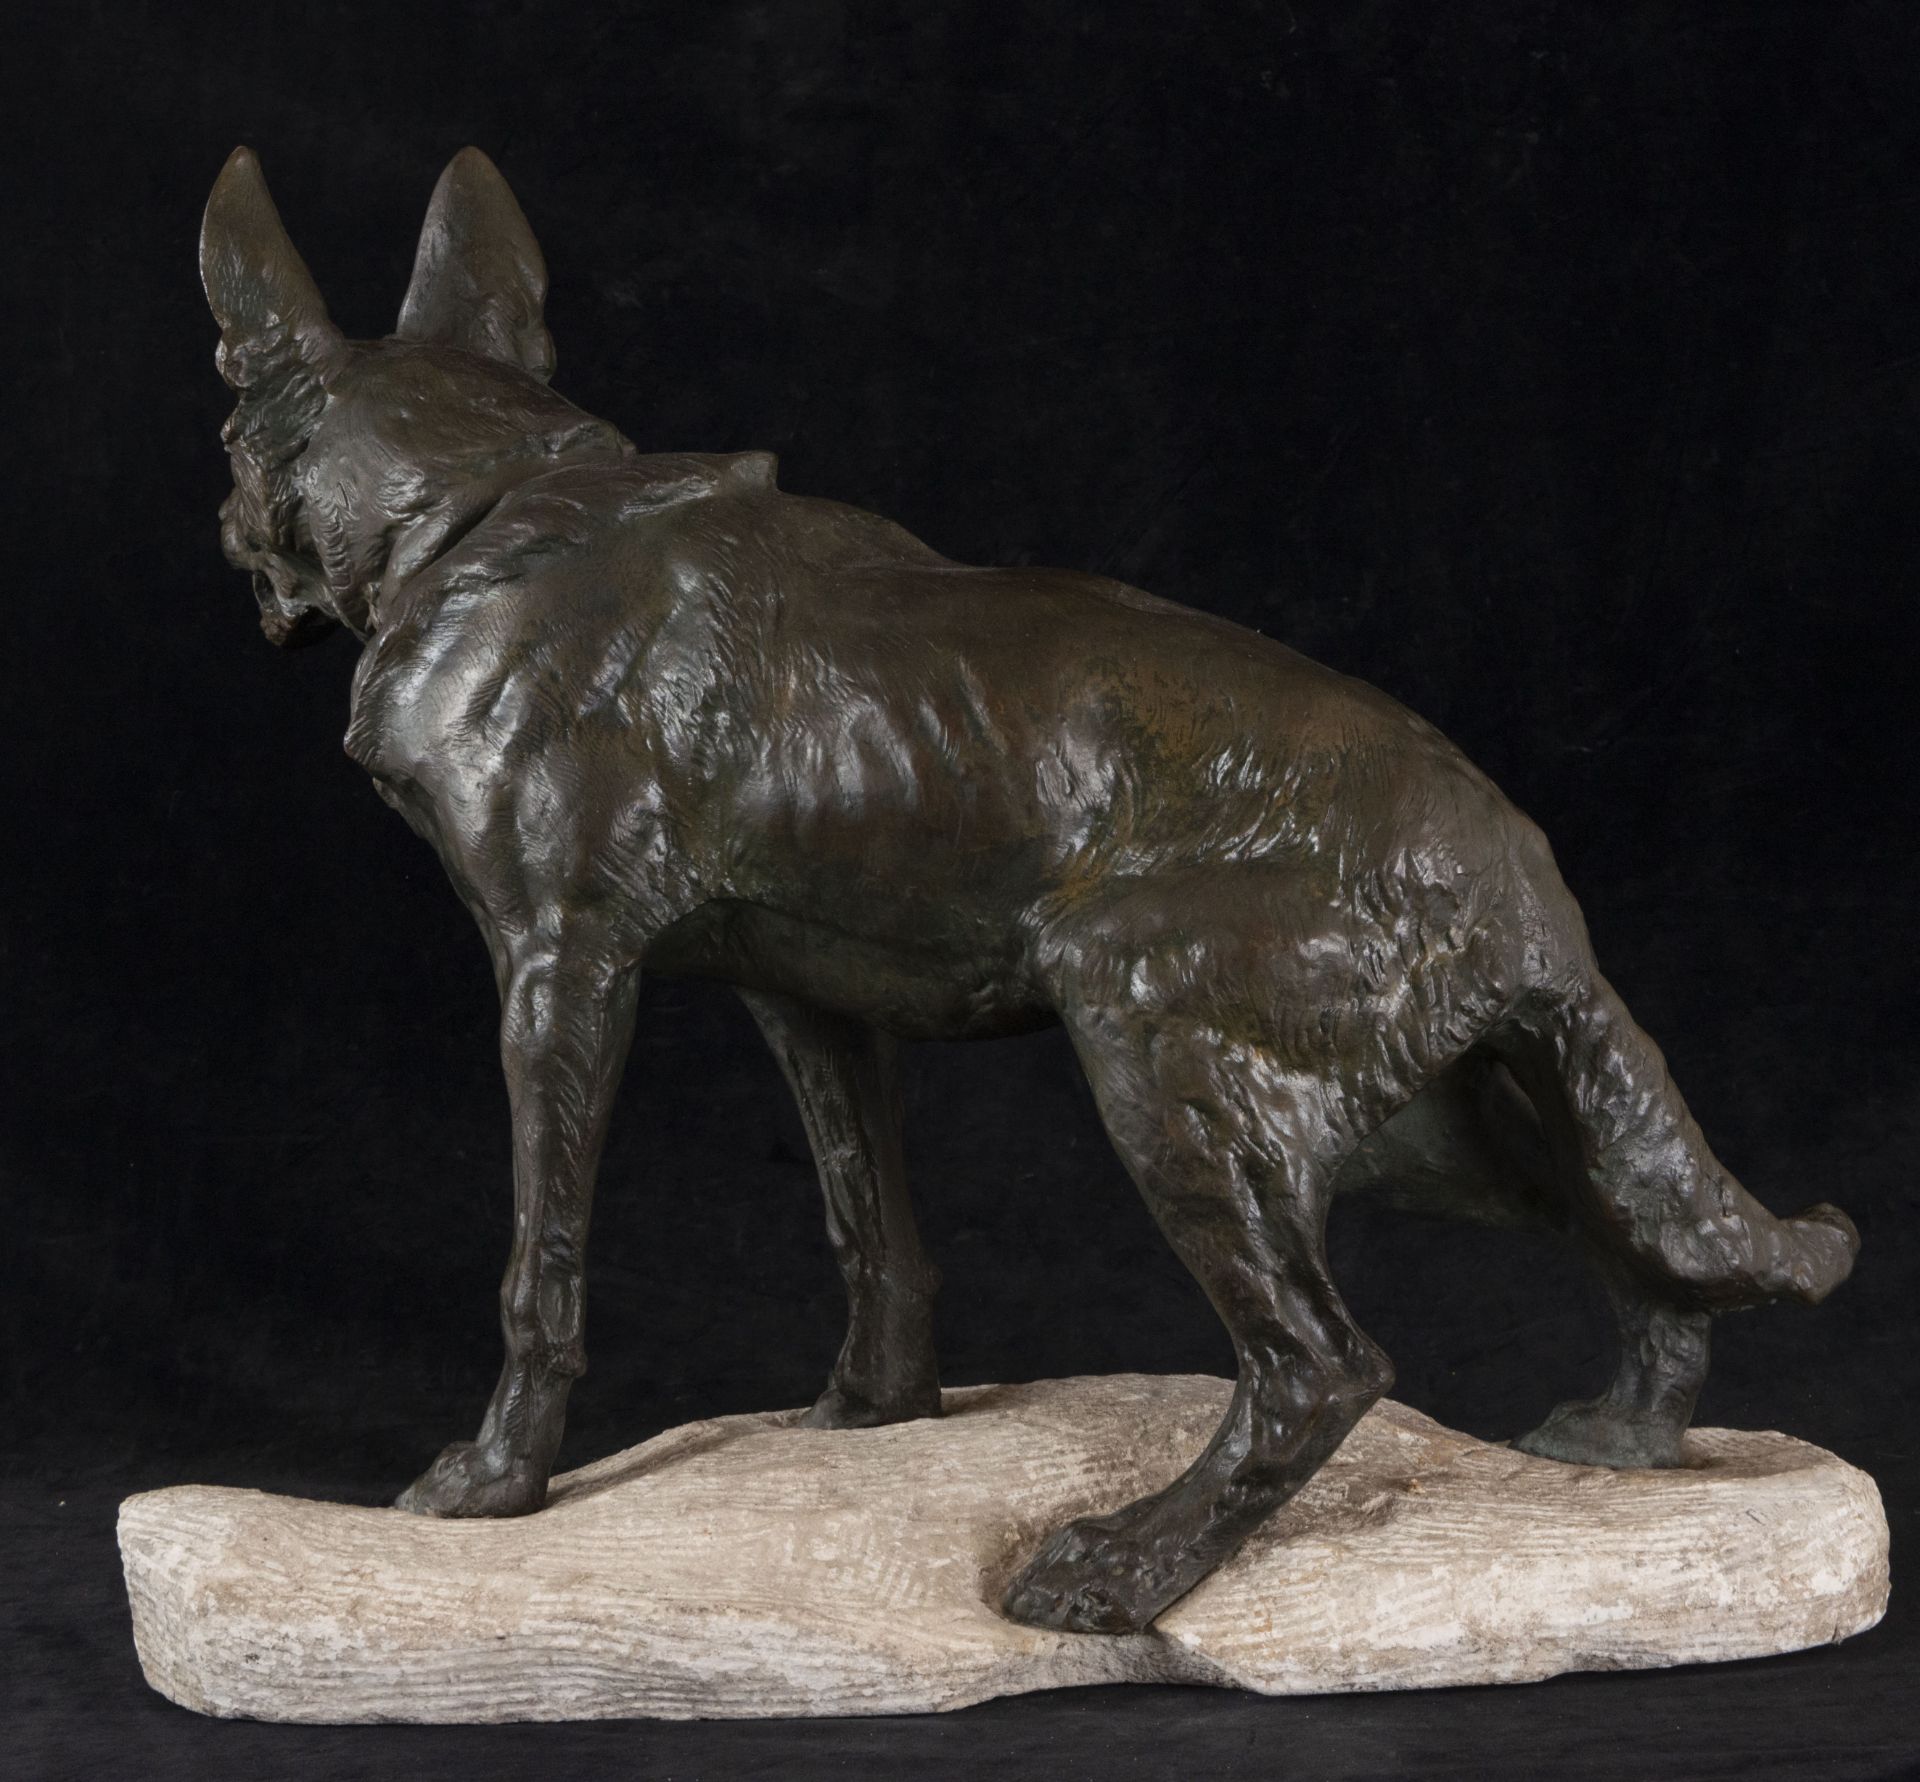 German Shepherd in Bronze, signed on the base Thomas Cartier (1879-1943), 1920s - Image 4 of 4